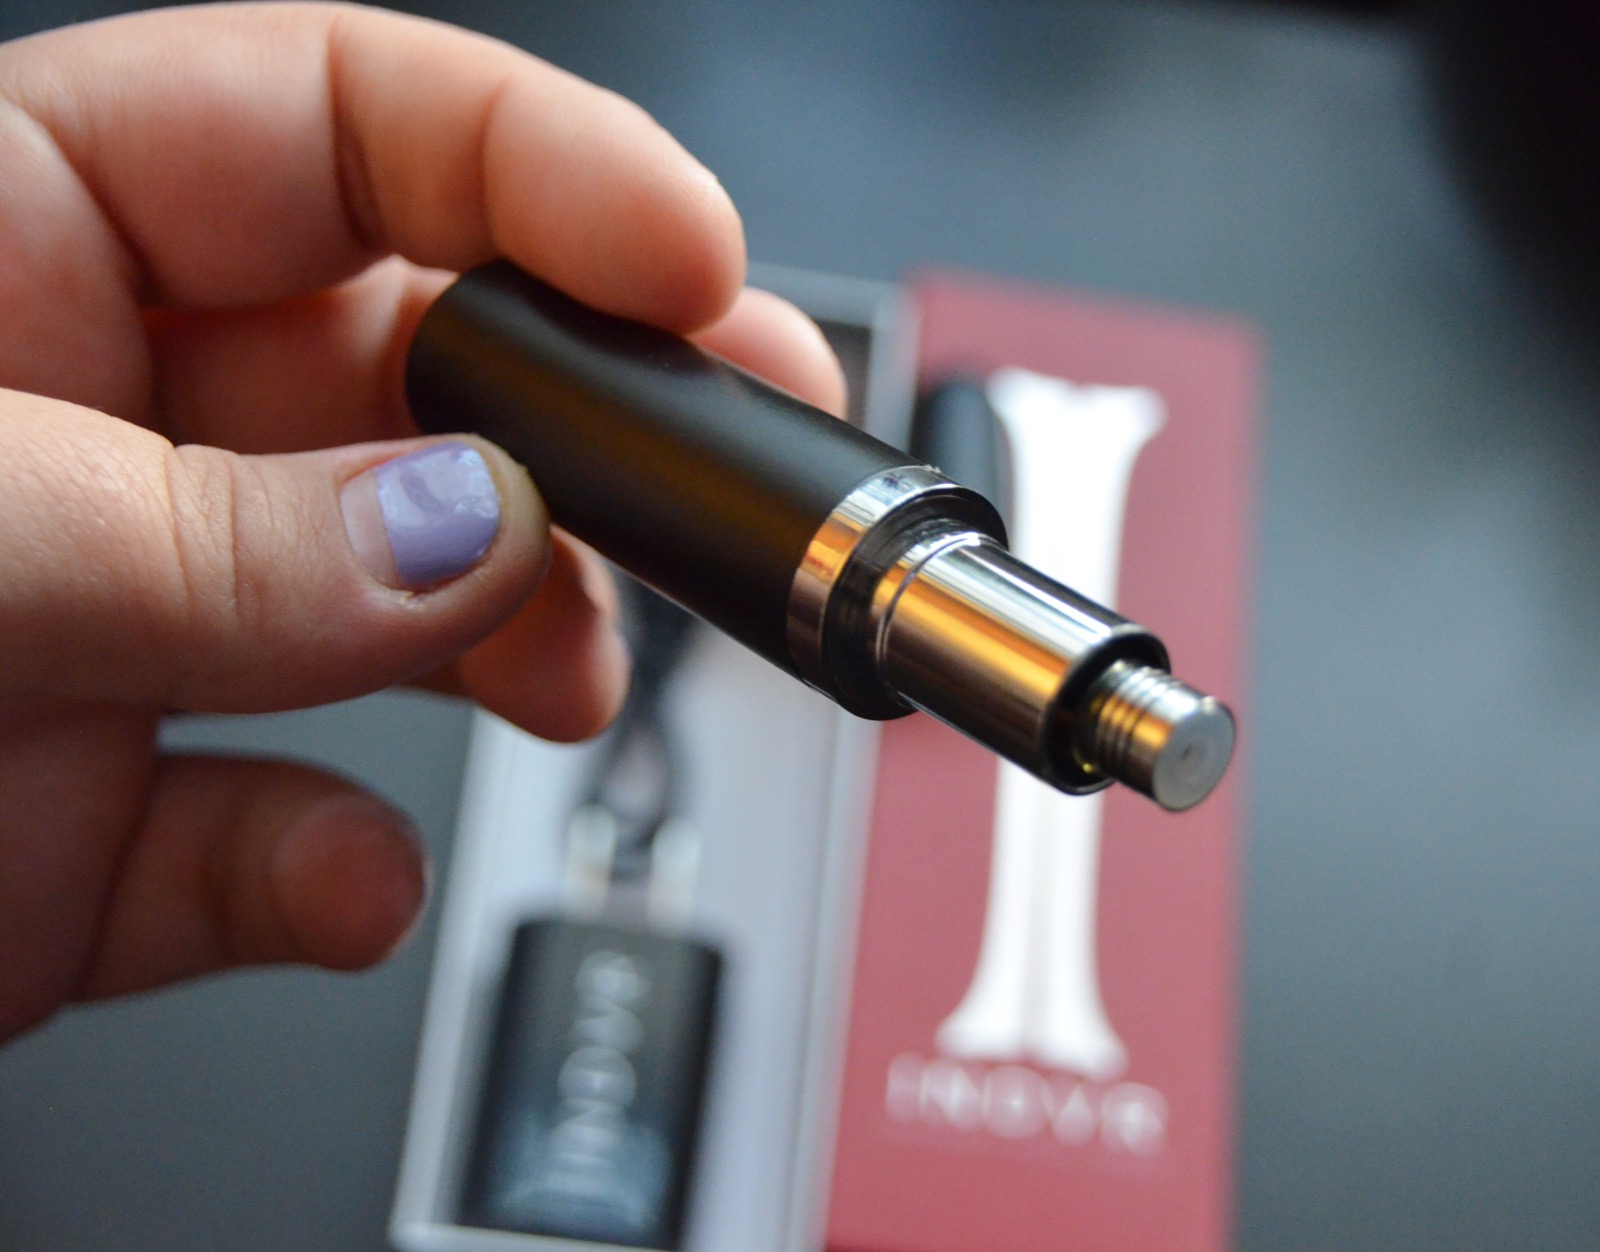 INVDR Lipstick weed vaporizer with cartridge (Lindsey Bartlett, The Cannabist)